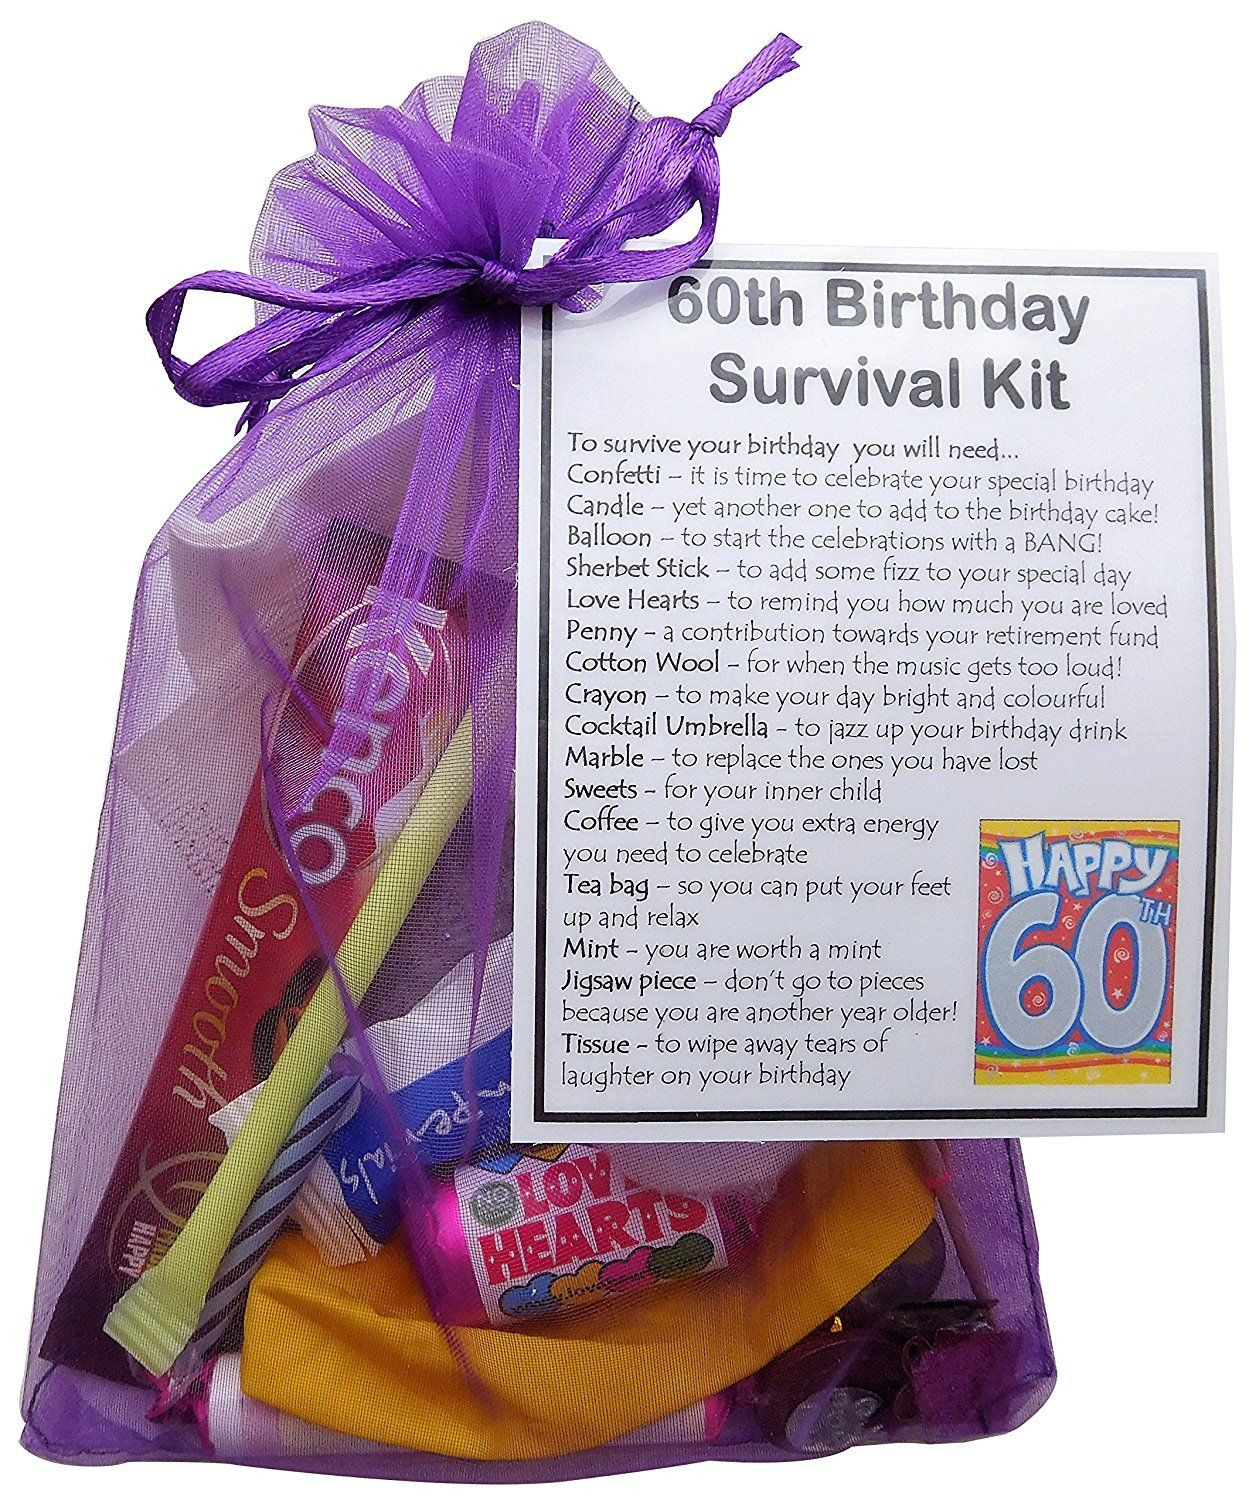 Gift Ideas For 60Th Birthday Female
 60th Birthday Gift Unique Novelty survival kit 60th